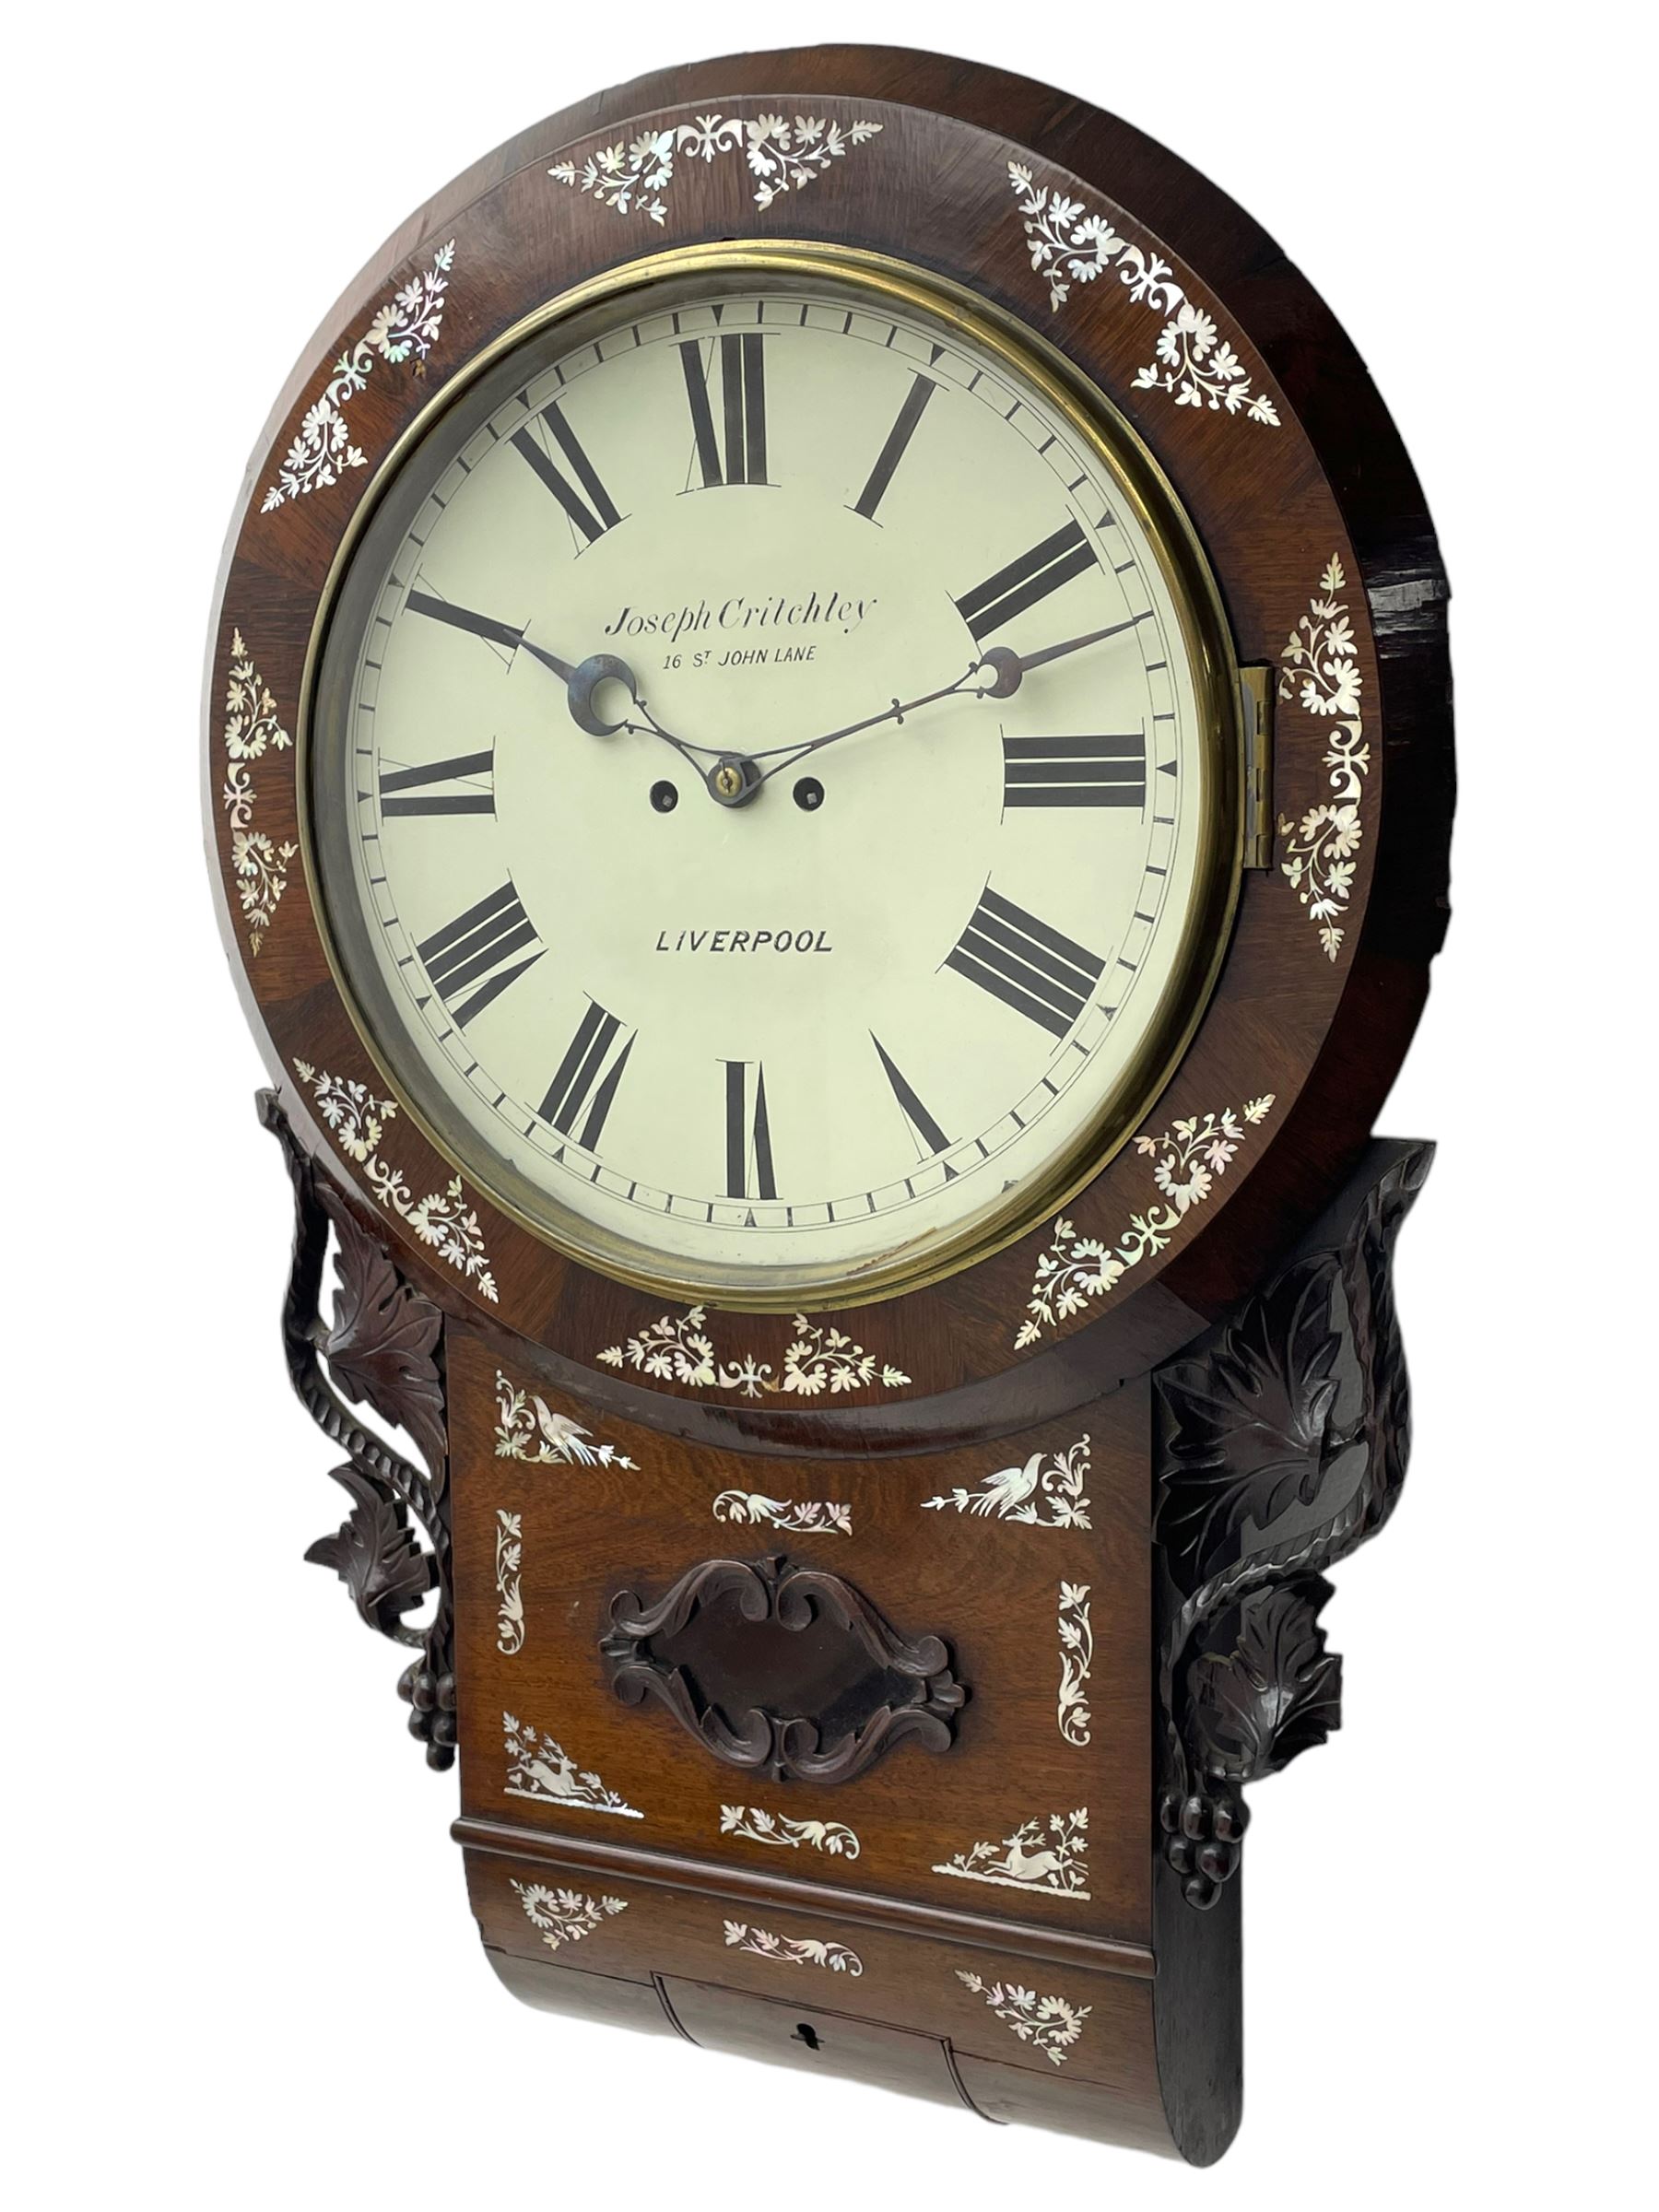 Joseph Critchley of Liverpool - early 19th century twin fusee 8-day rosewood and mother of pearl in